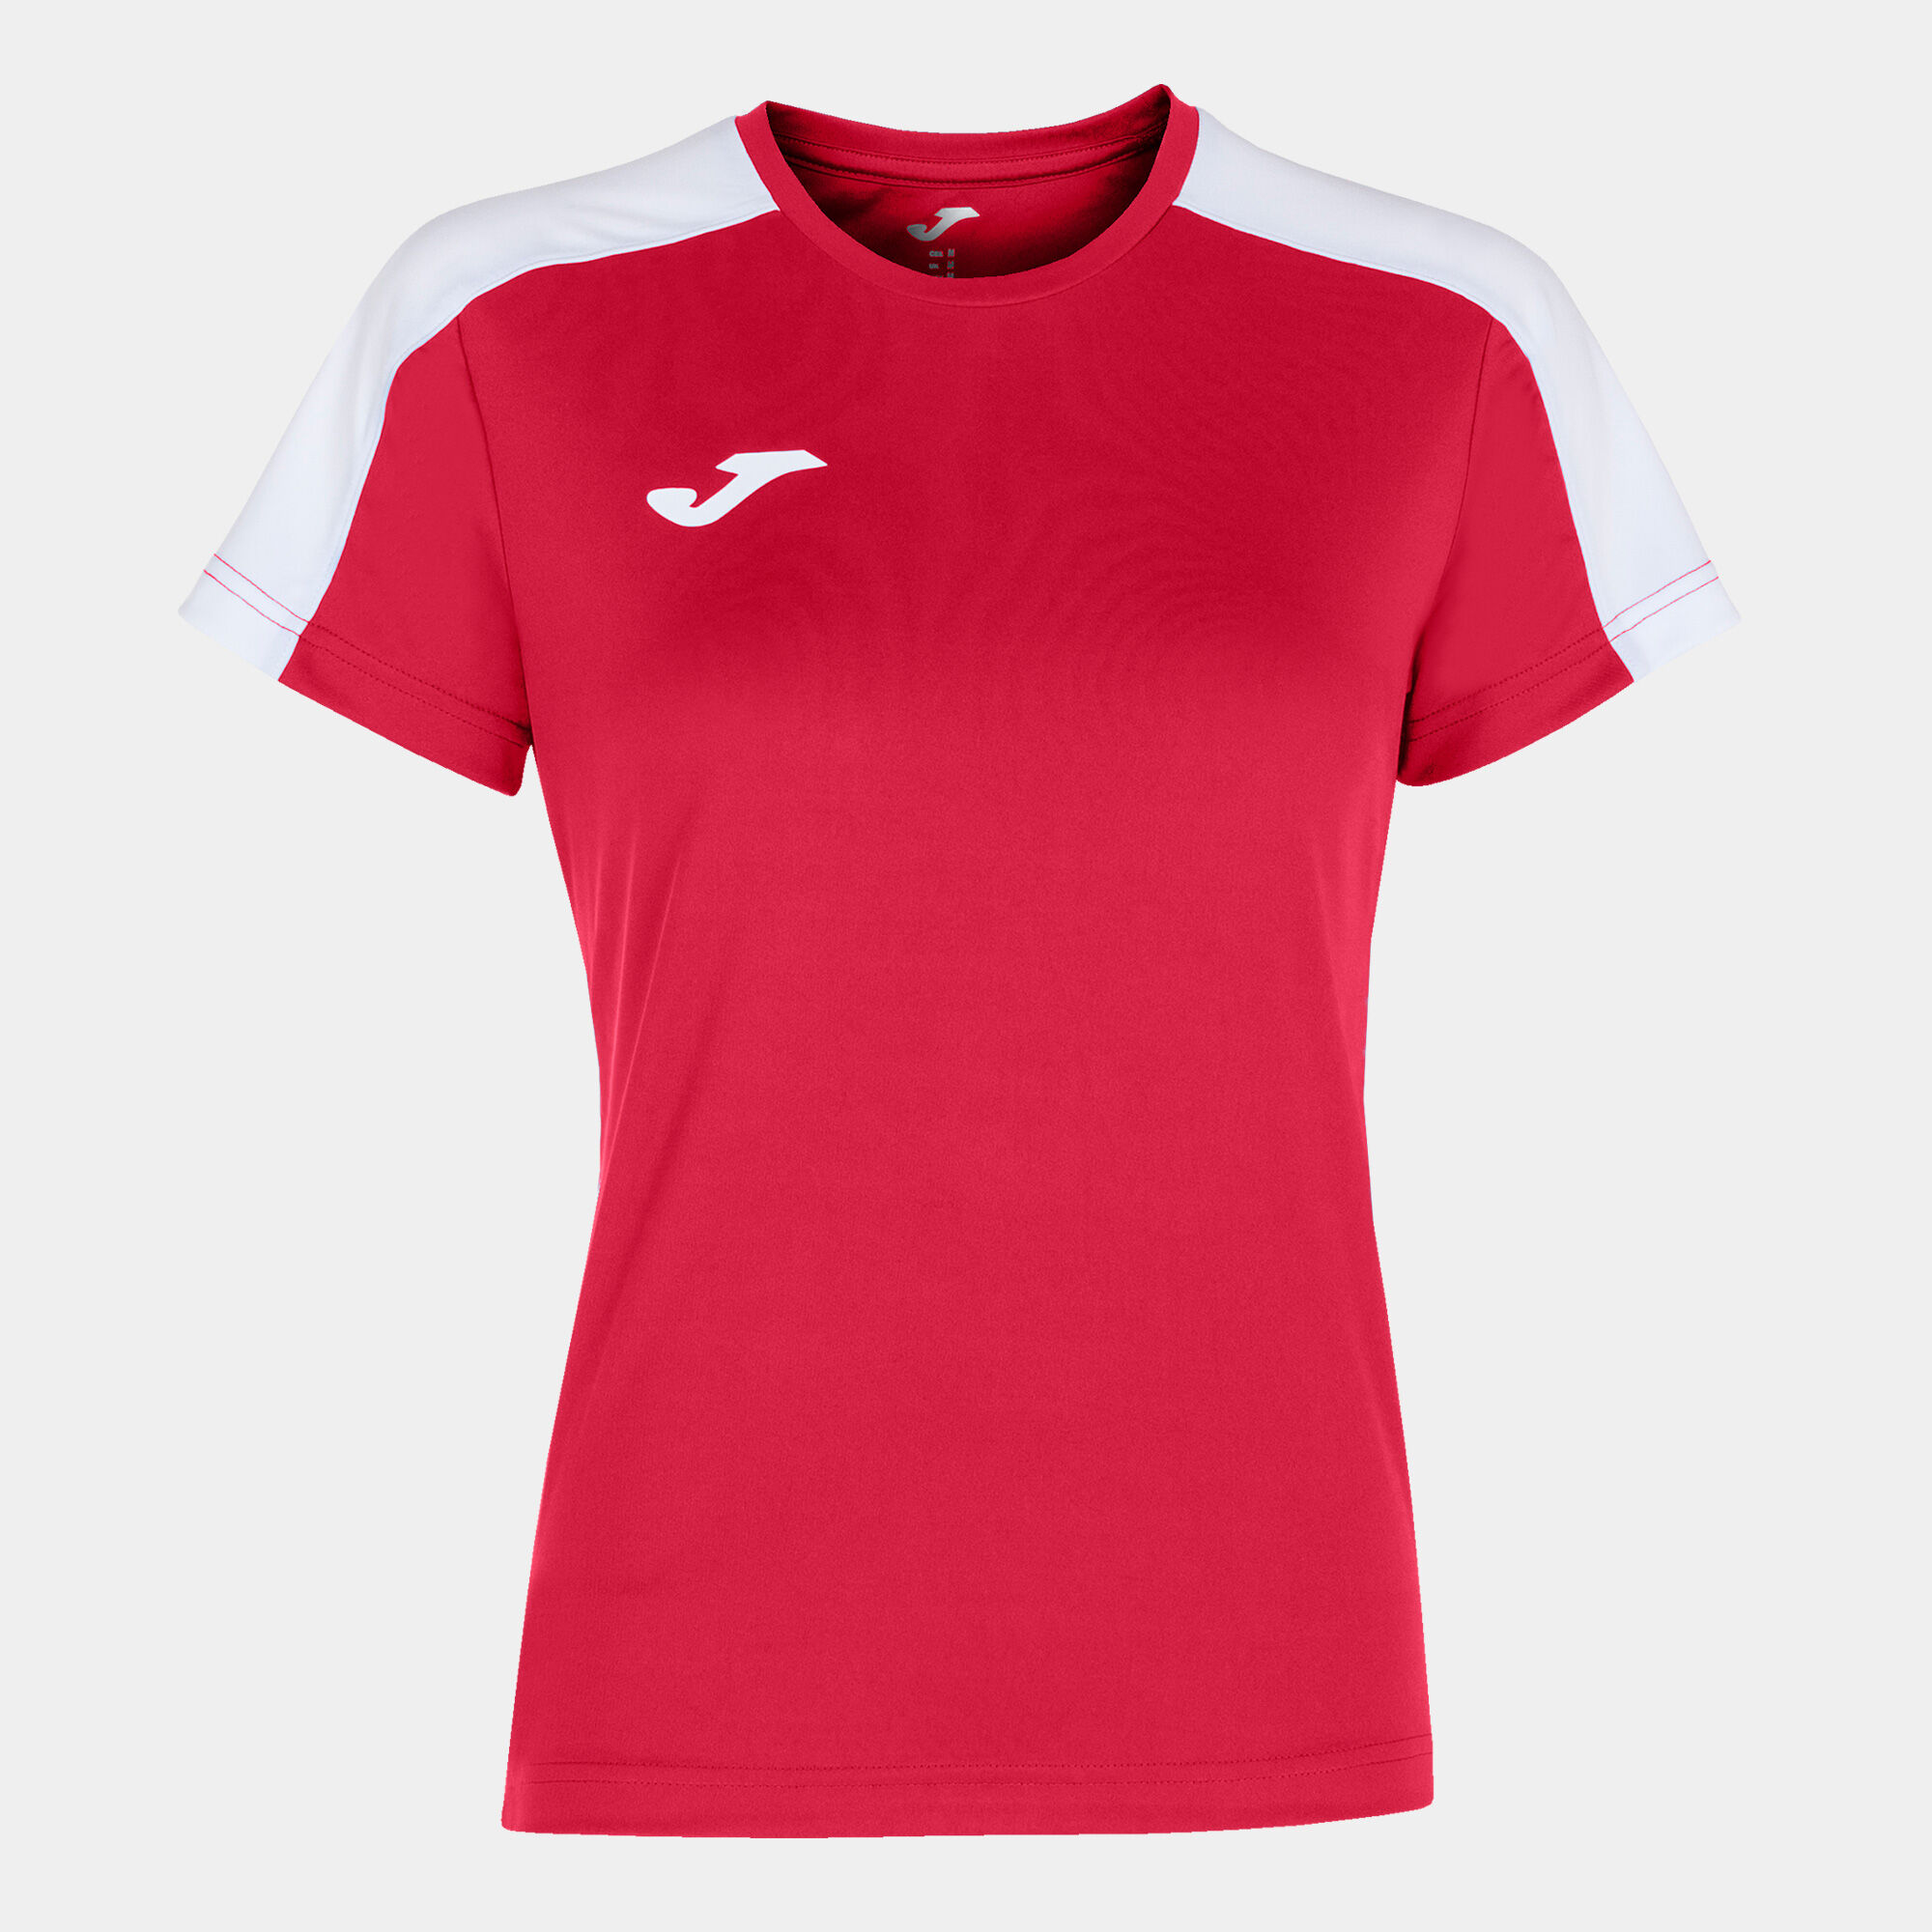 MAILLOT MANCHES COURTES FEMME ACADEMY III ROUGE BLANC